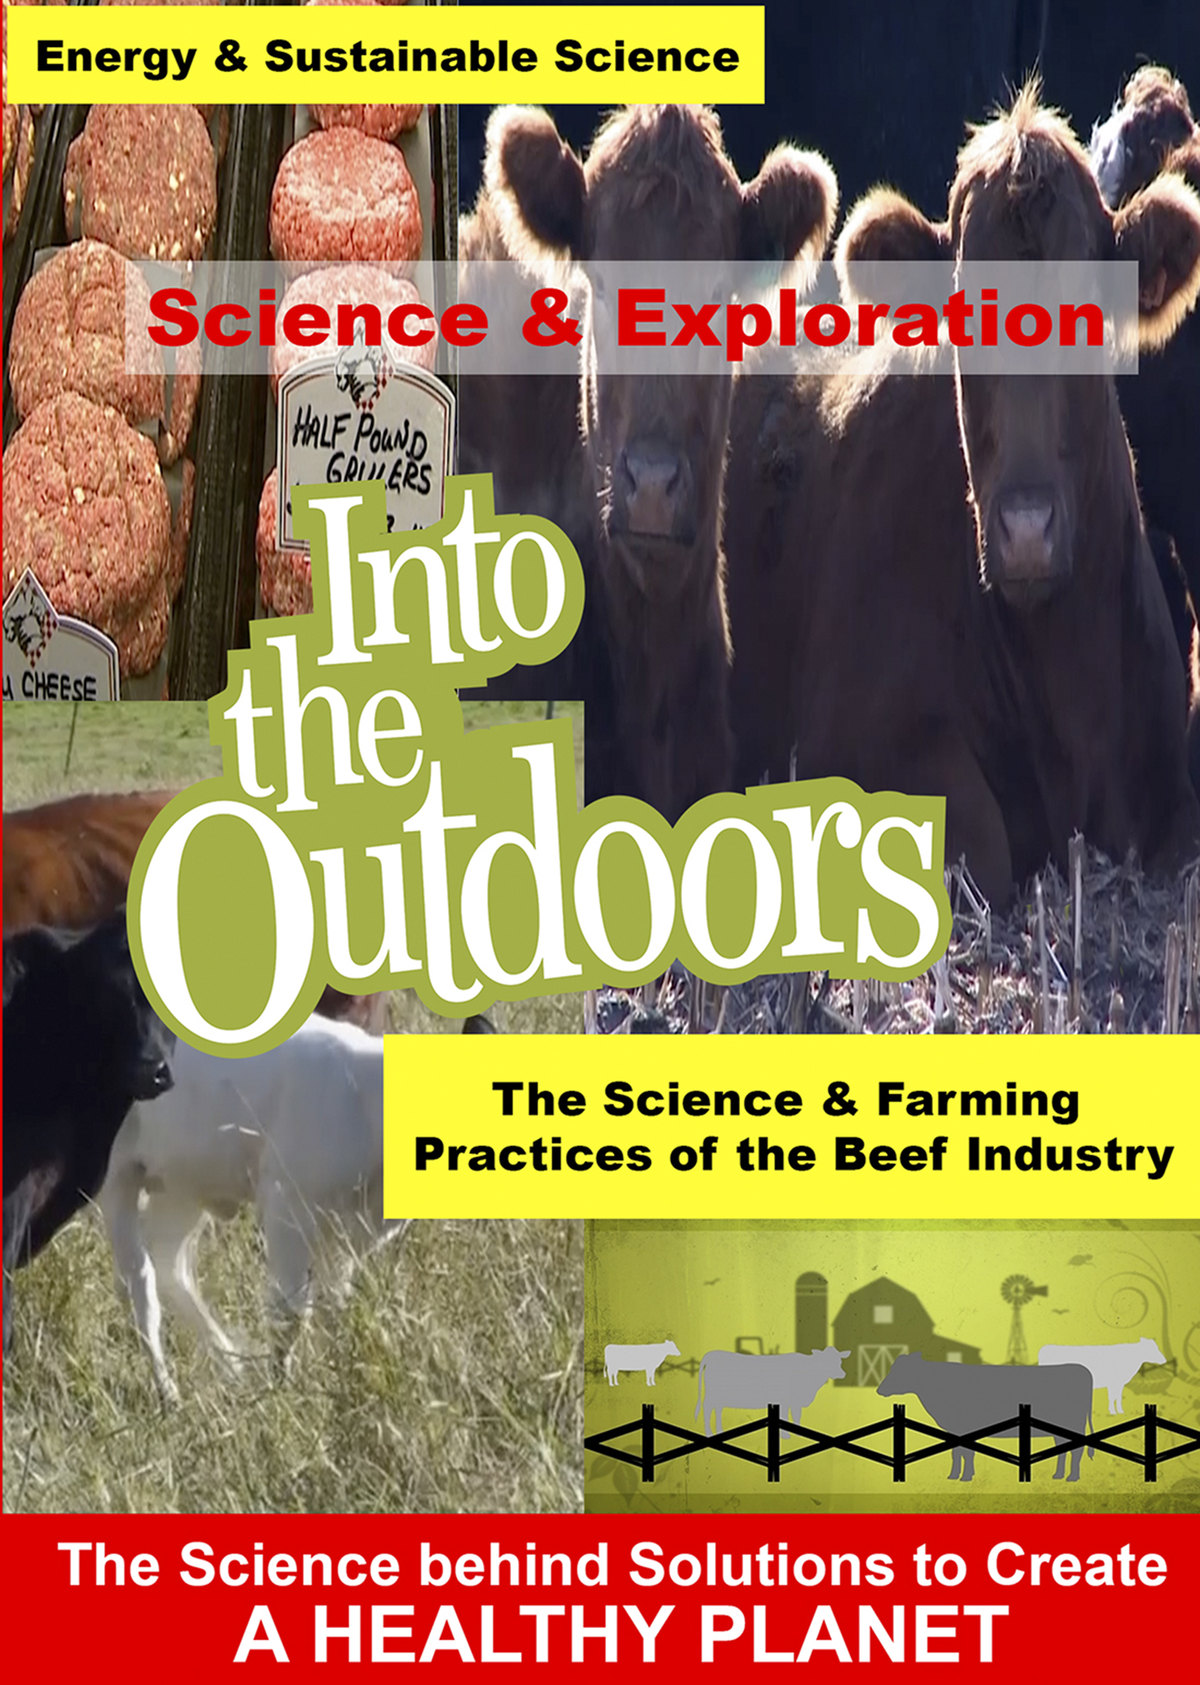 K4999 - The Science & Farming Practices of the Beef Industry